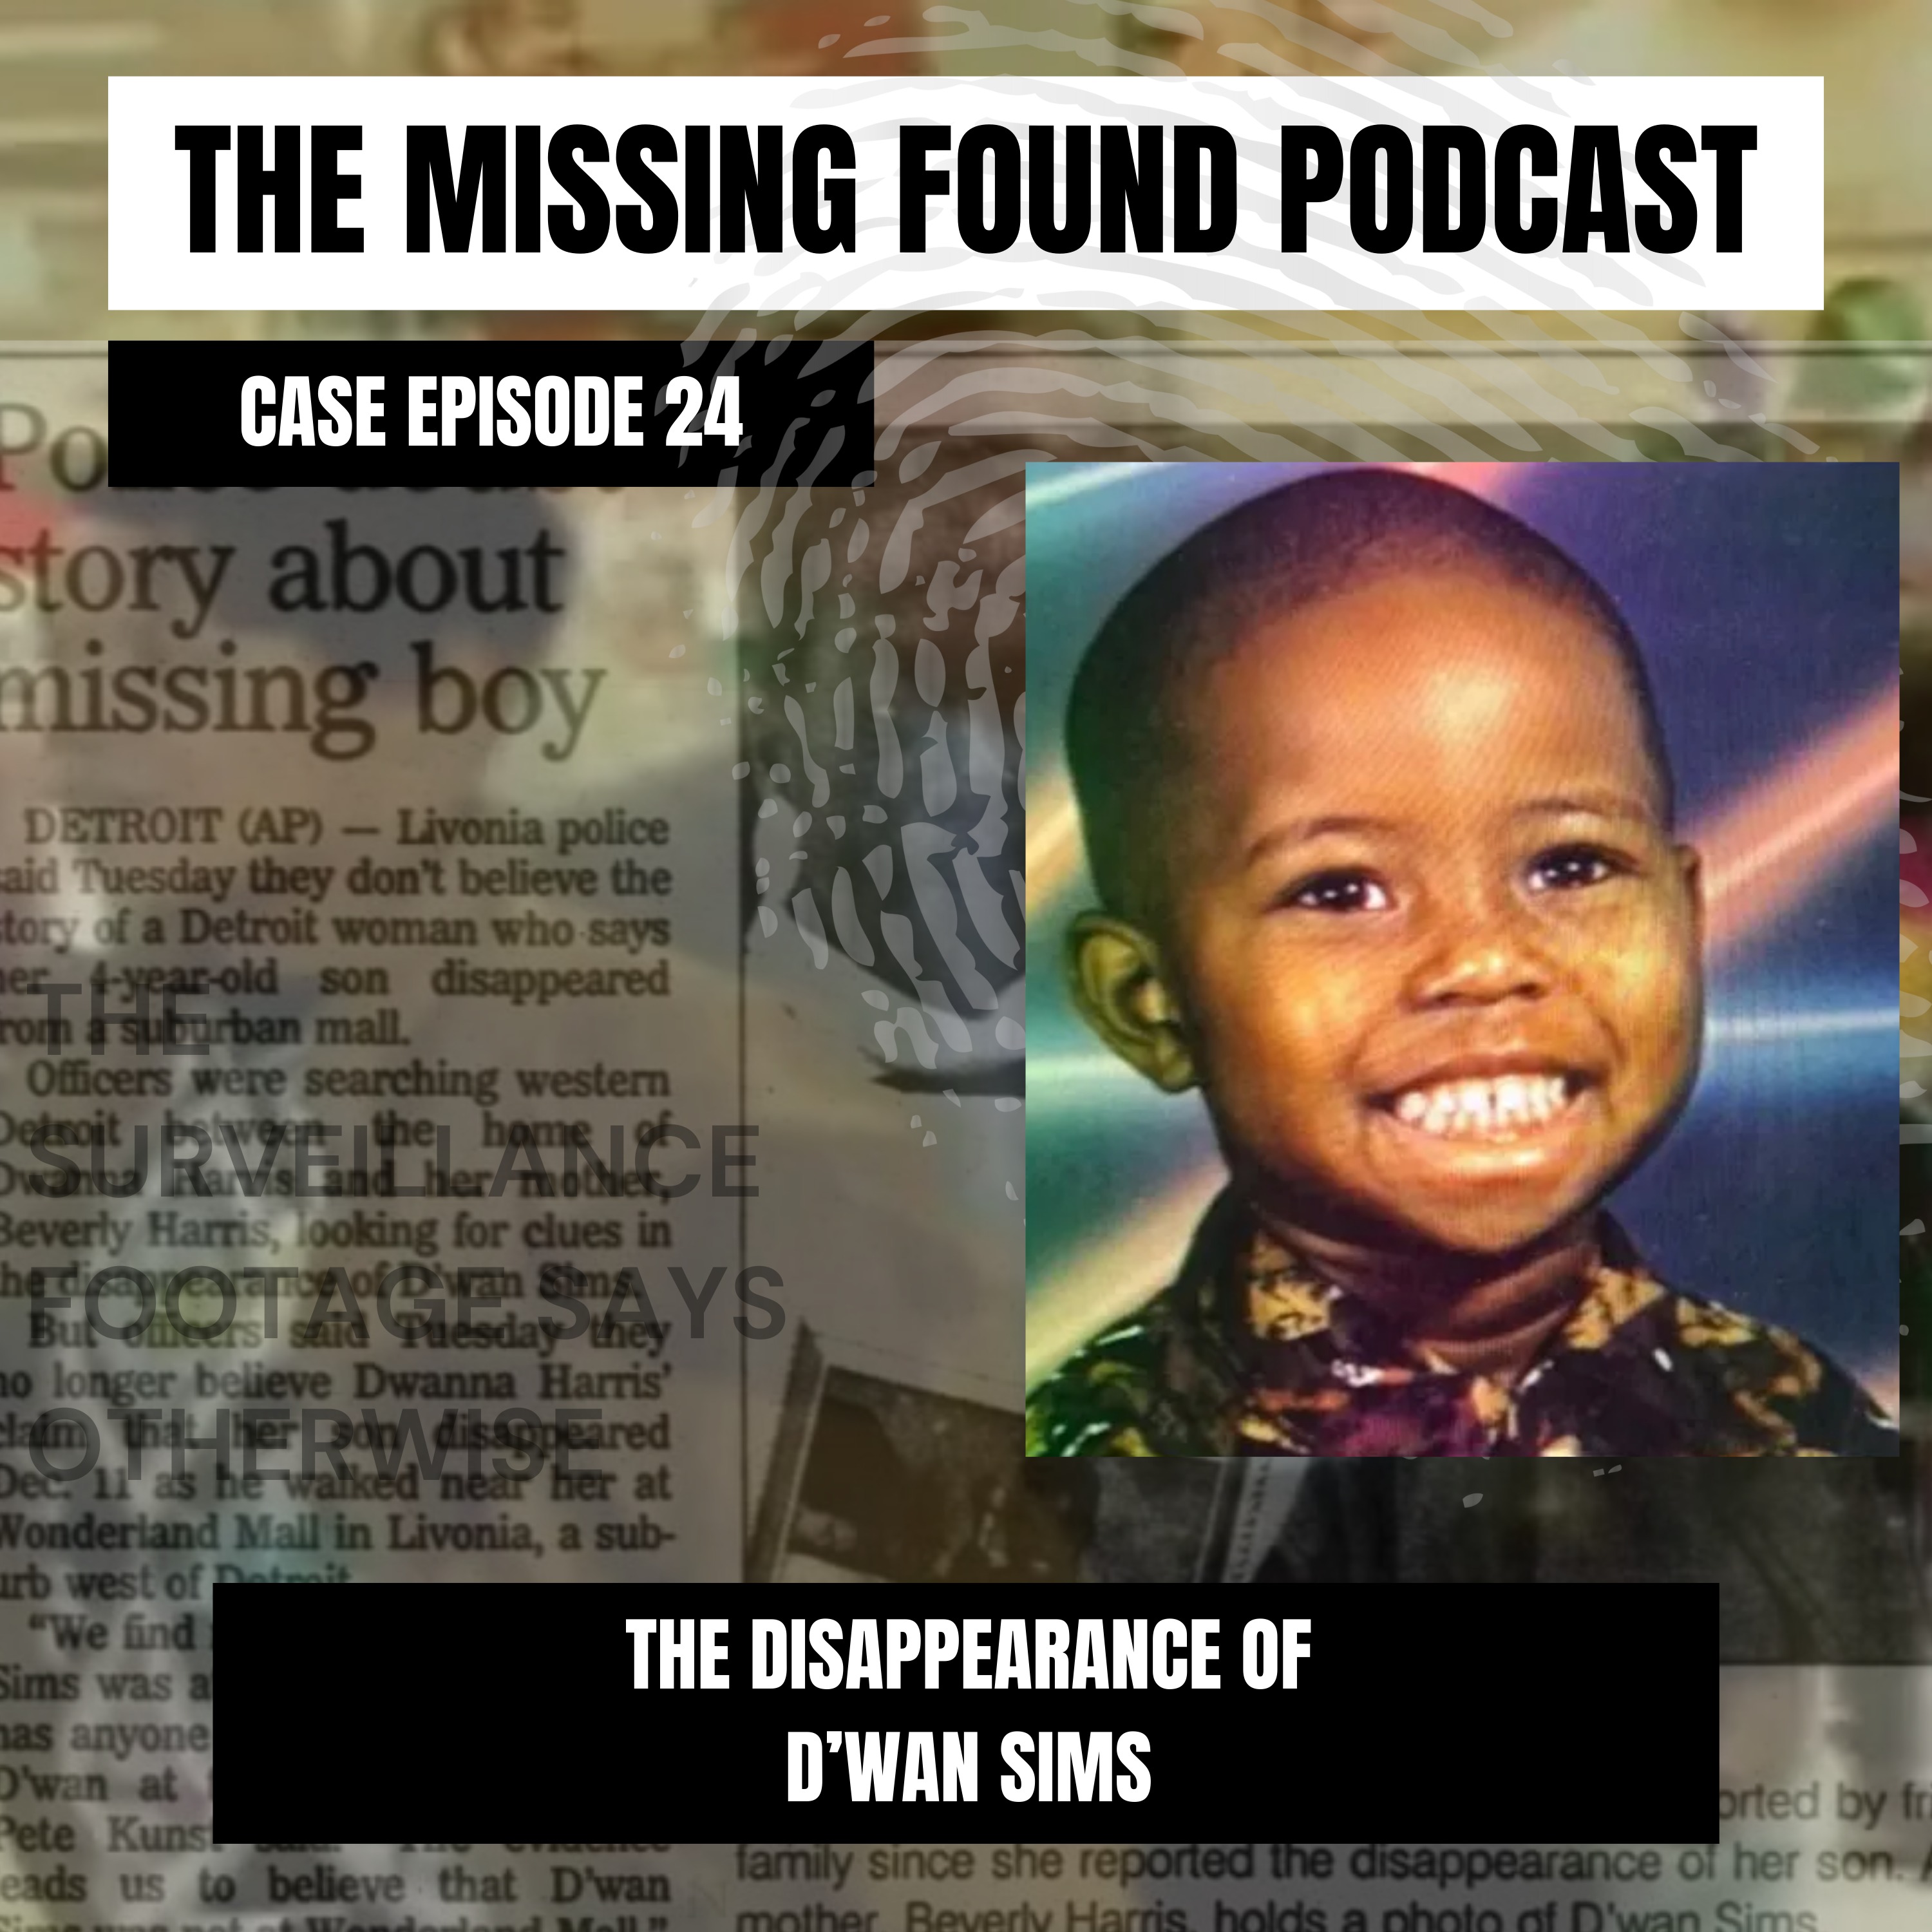 Case Episode 24 | D'Wan Sims: A 30 Year Questionable Mystery, but There Is One Thing Missing